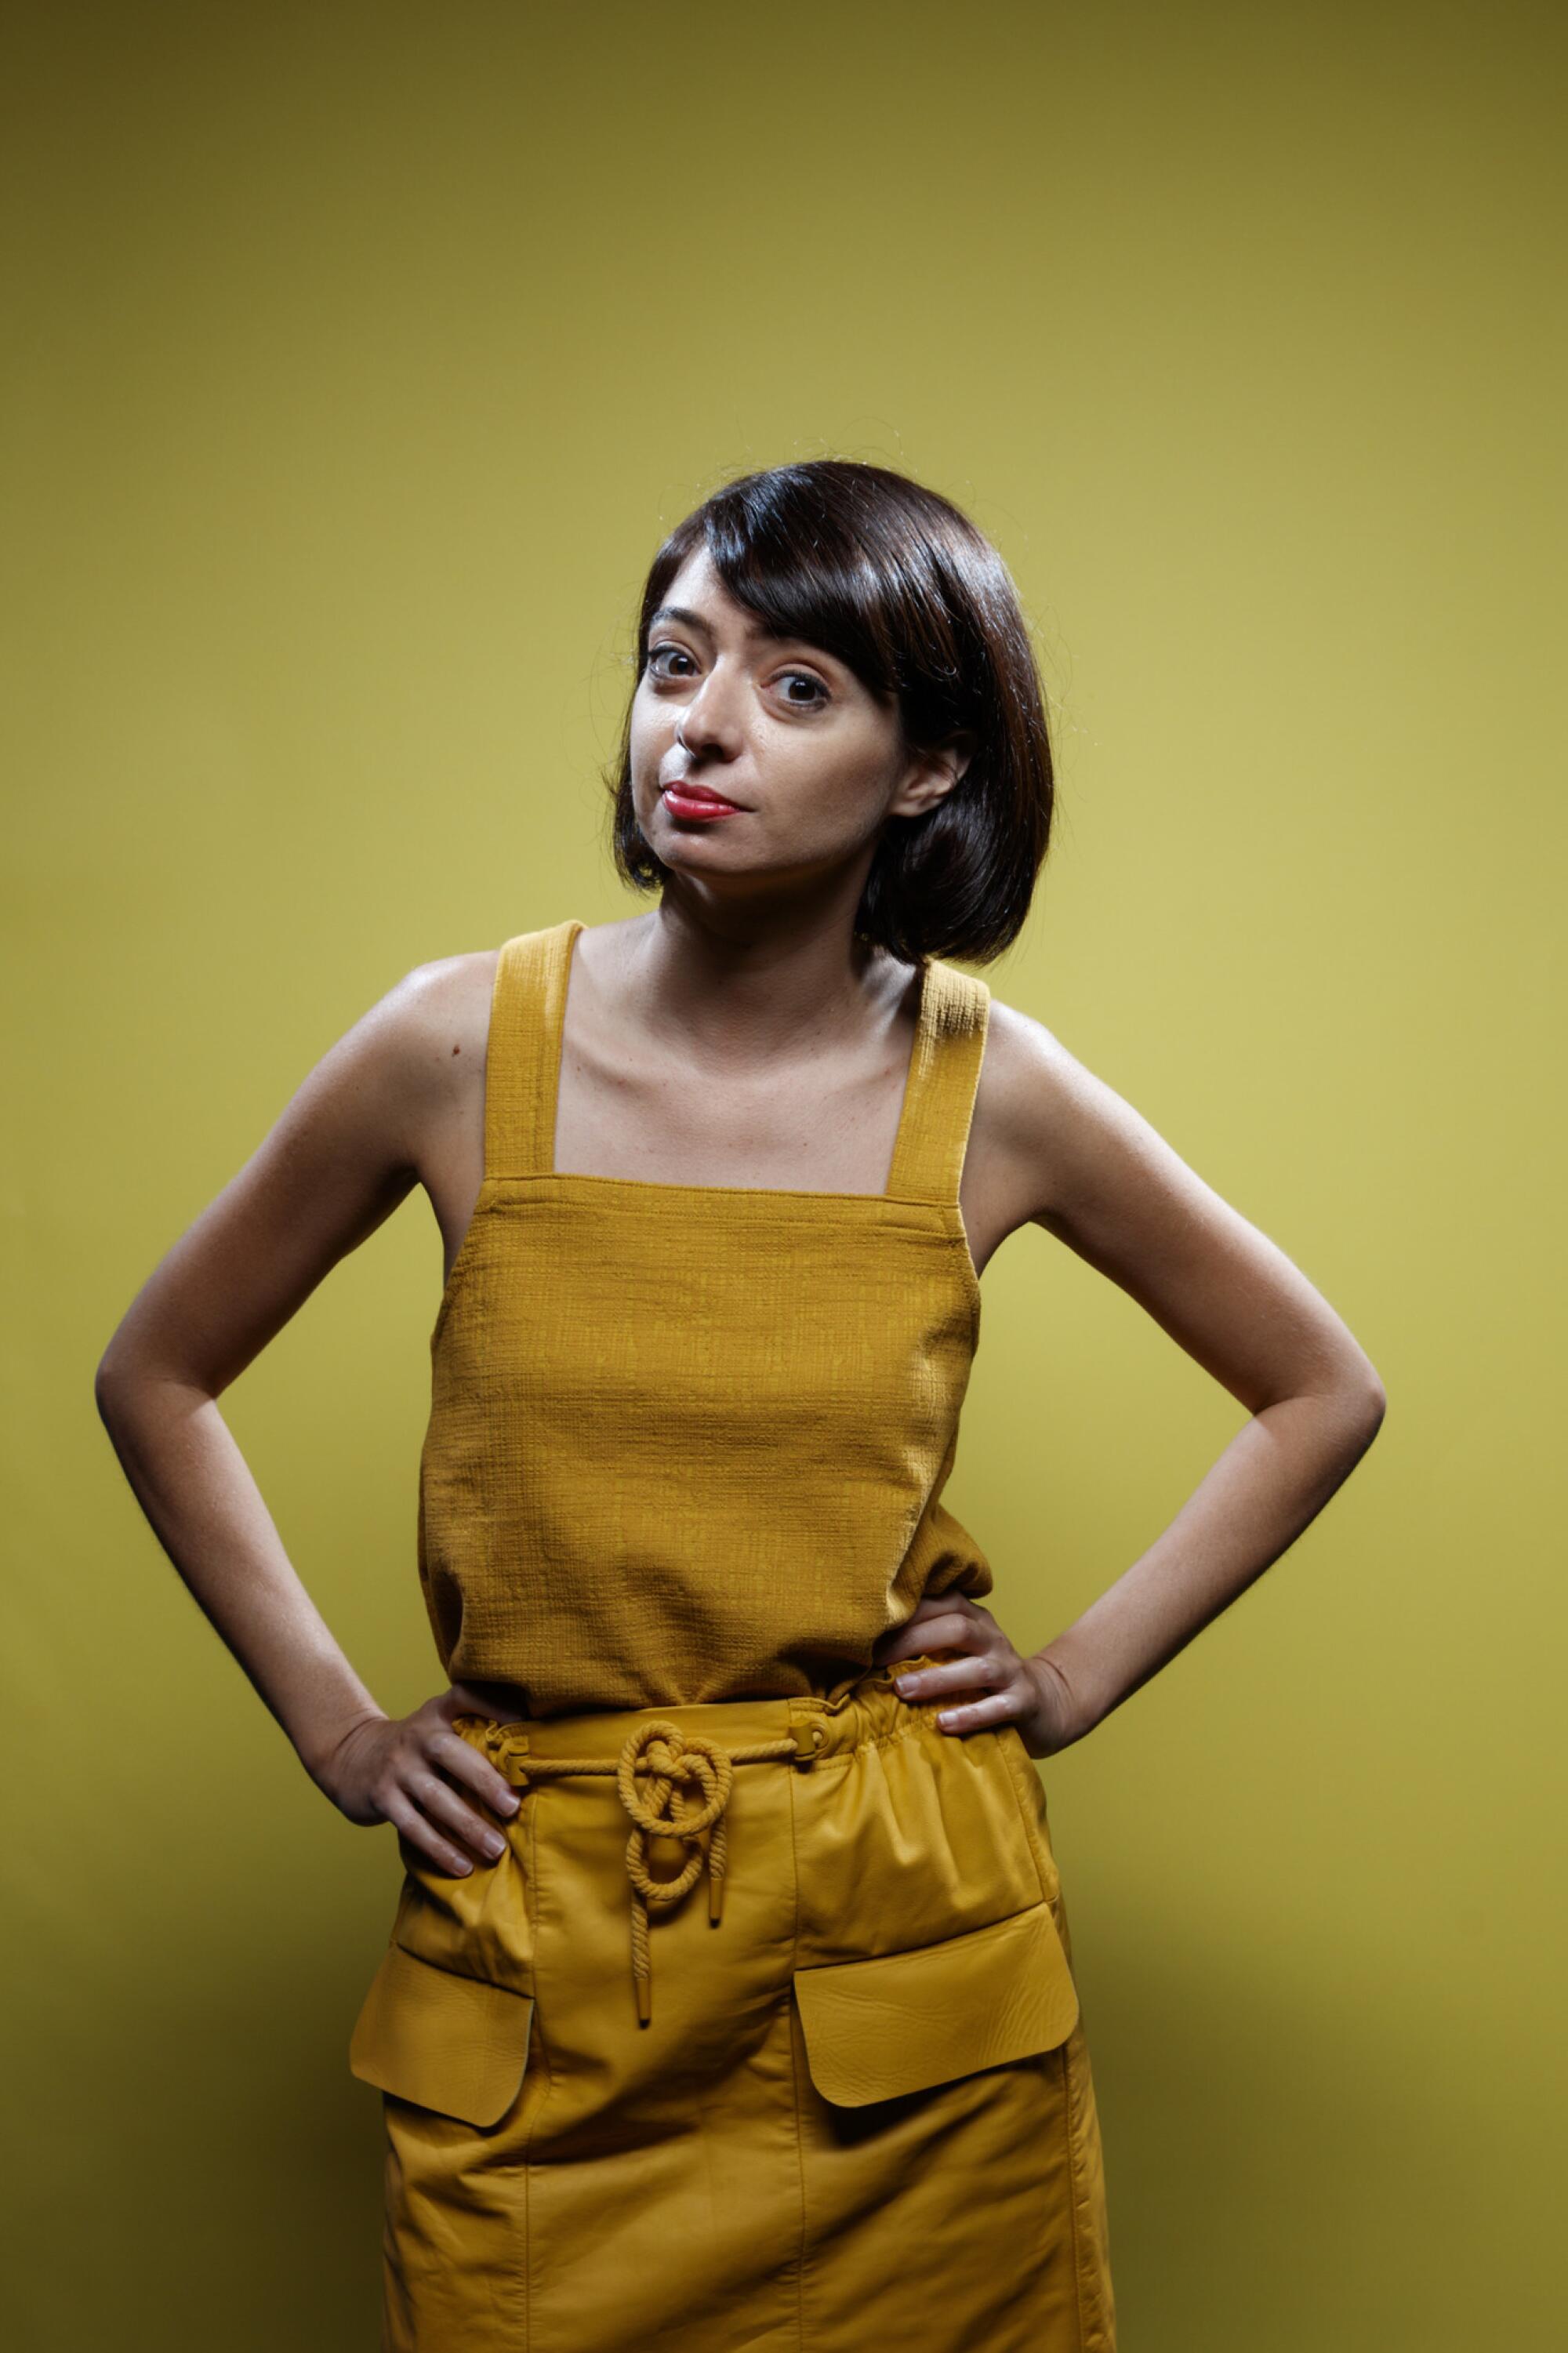 Kate Micucci, from the television series "DuckTales," photographed in the L.A. Times photo studio at Comic-Con 2017.